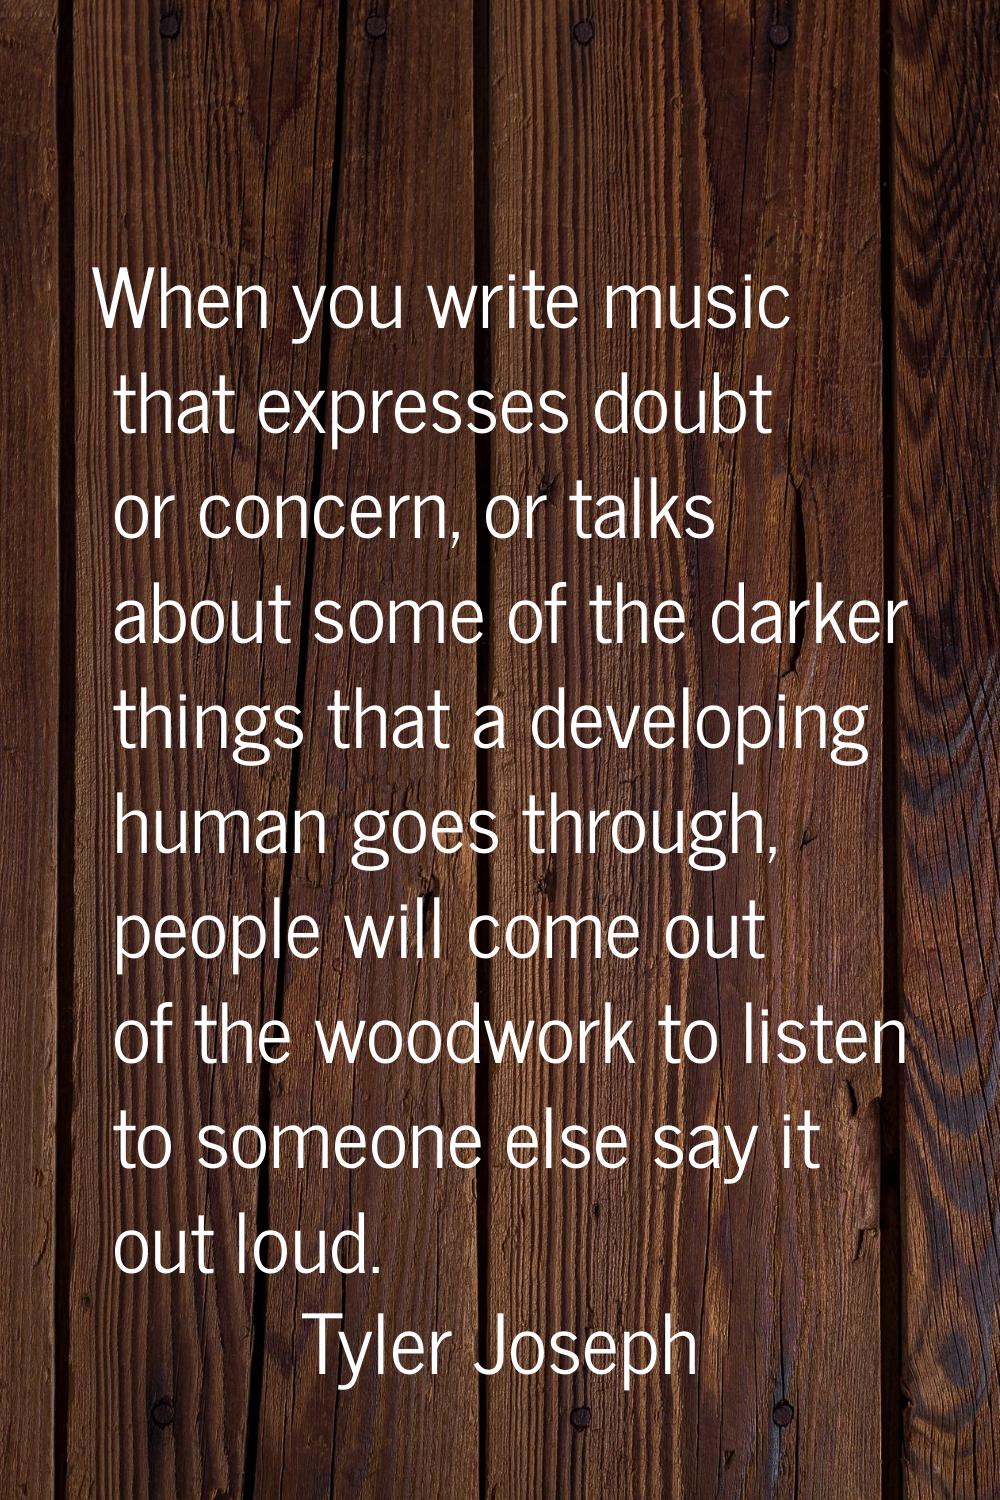 When you write music that expresses doubt or concern, or talks about some of the darker things that